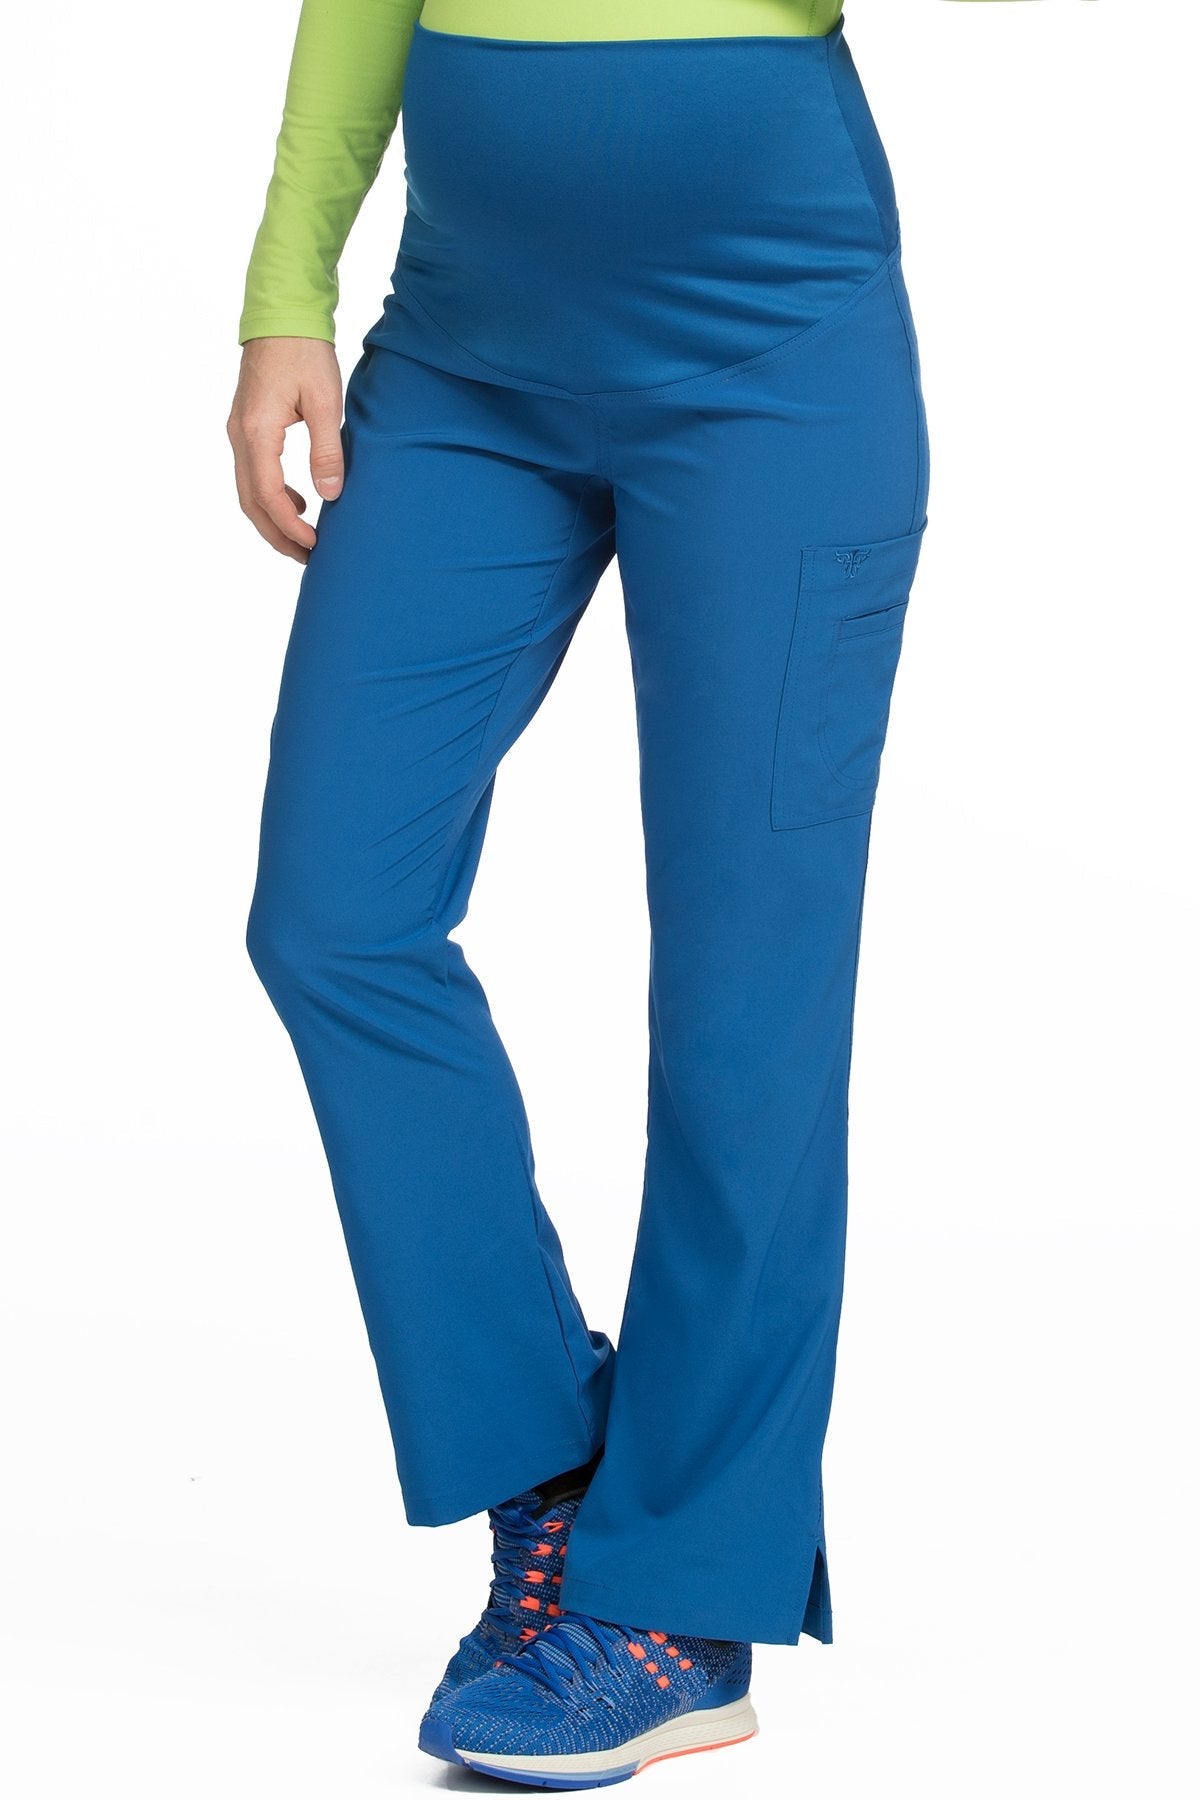 Med Couture Activate Maternity Pant Royal Blue